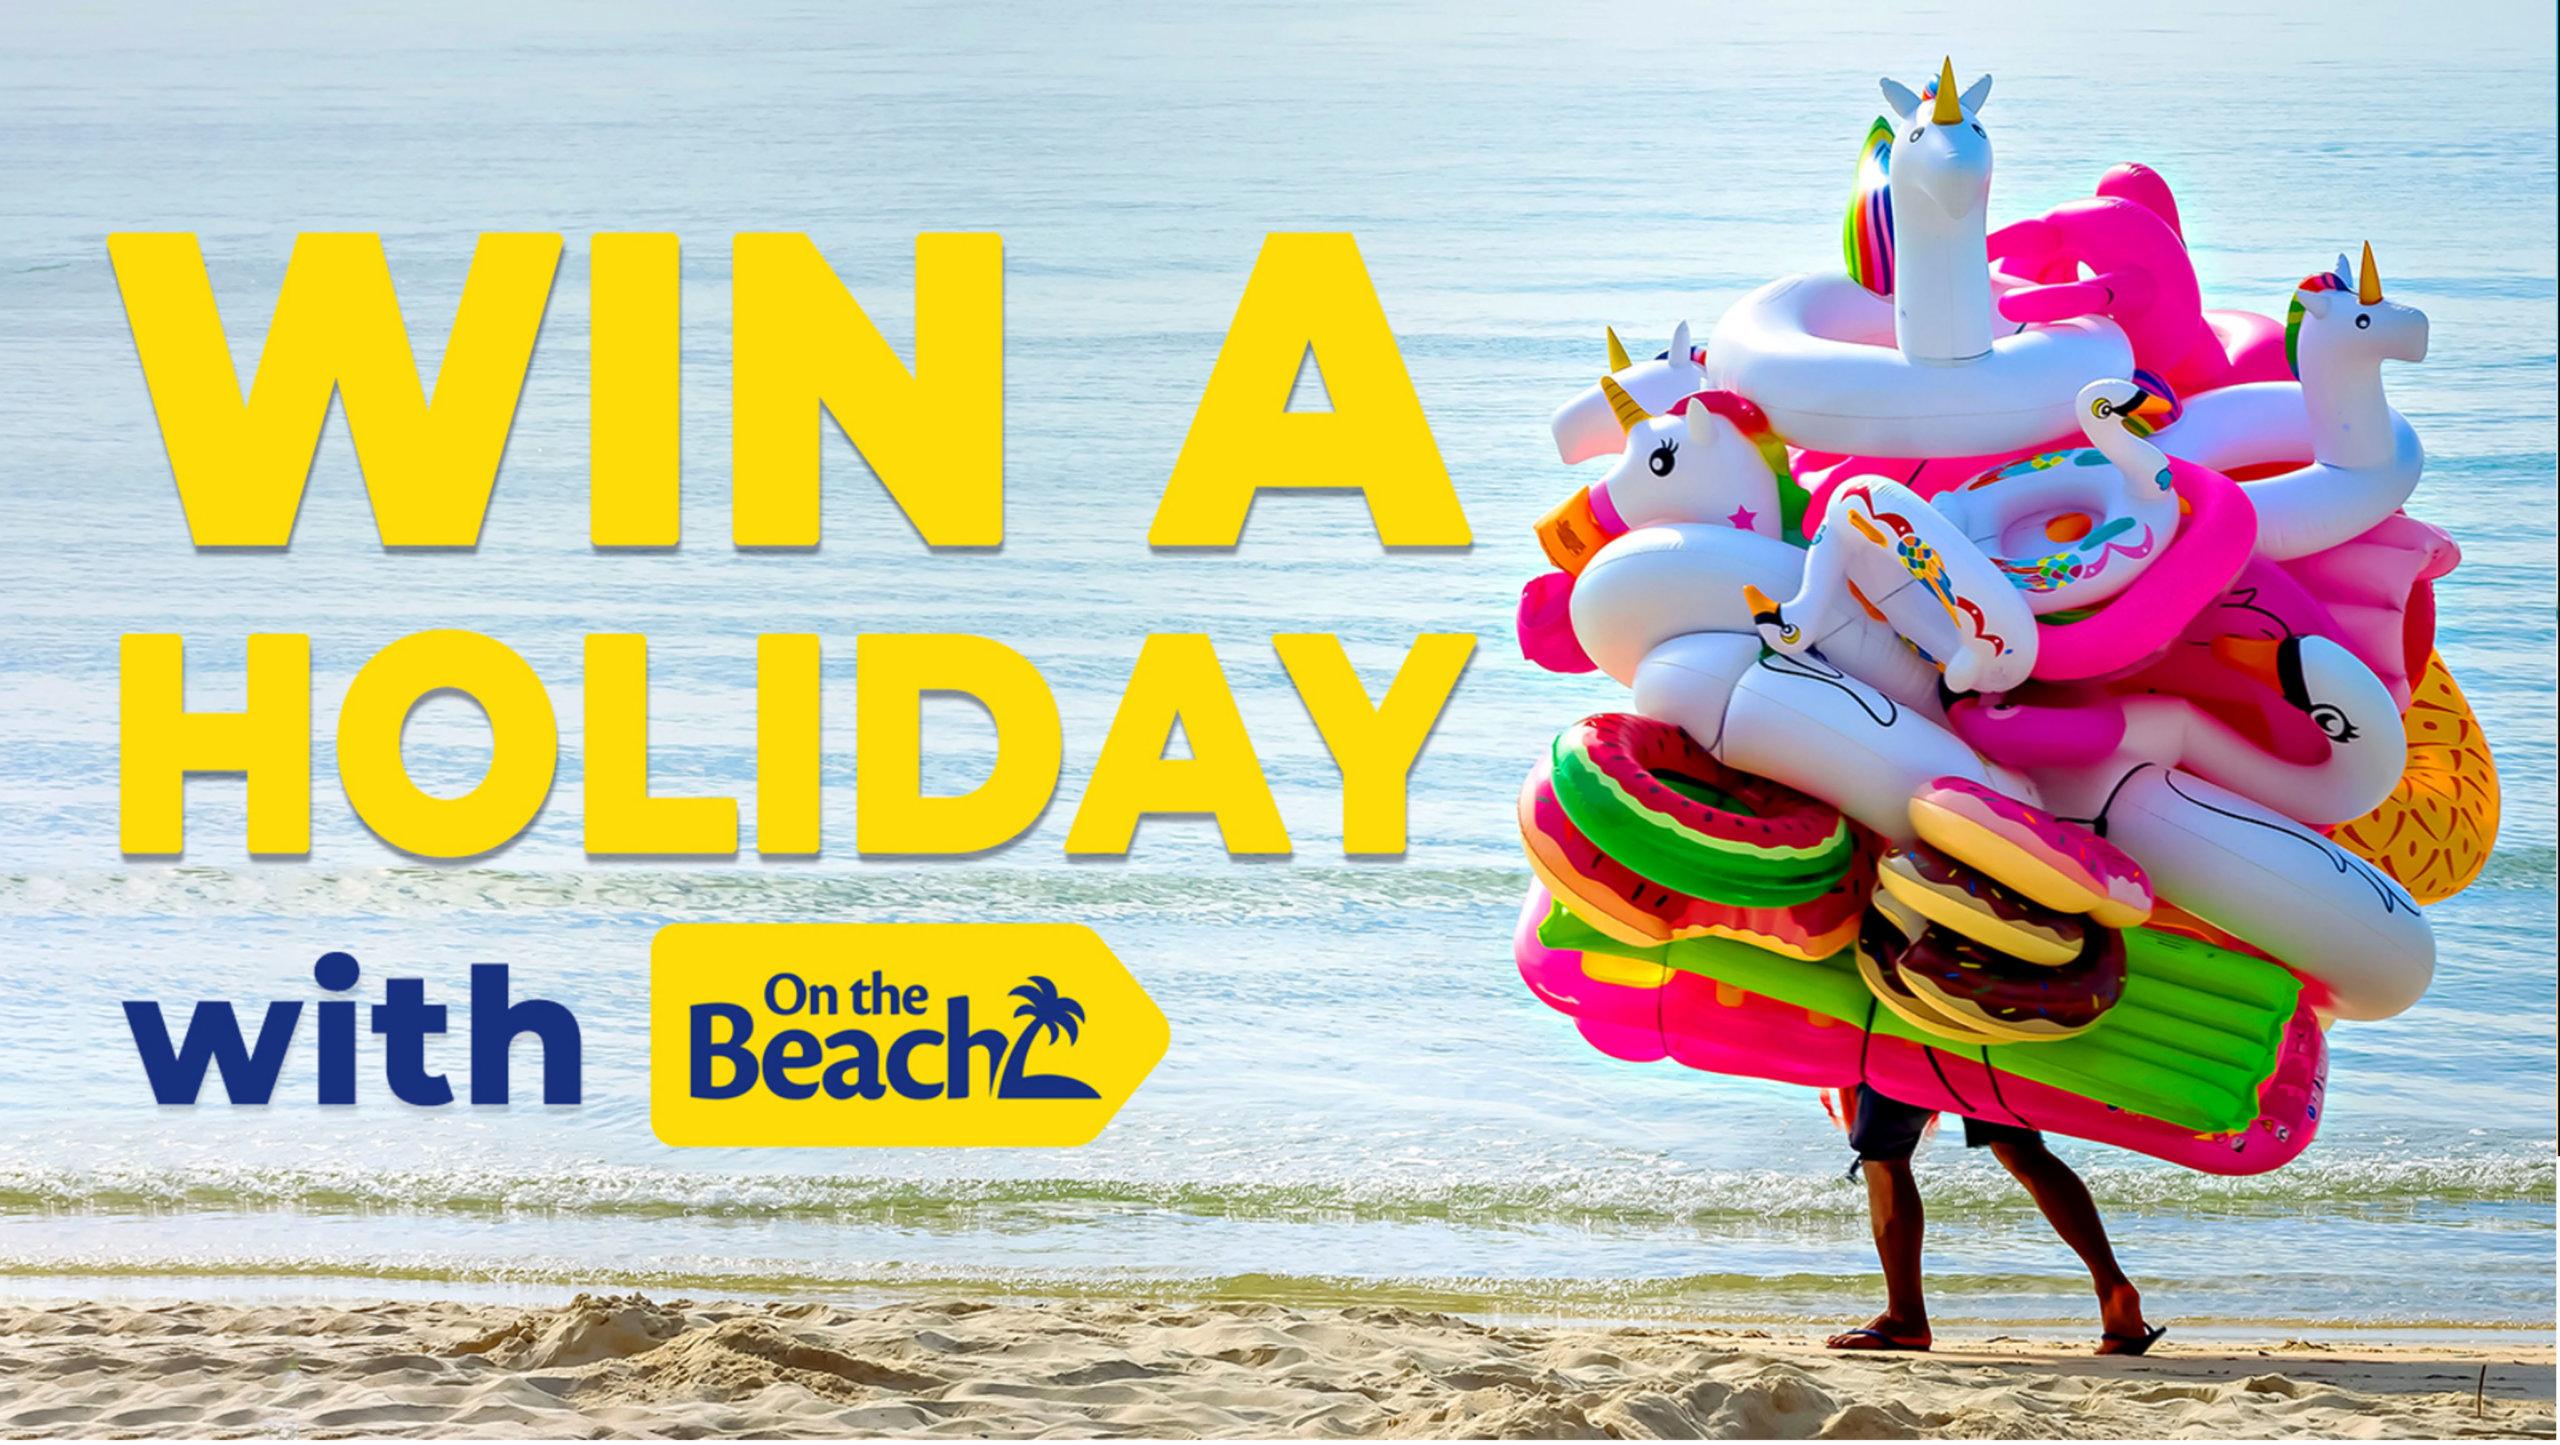 WIN an all-inclusive holiday to Spain with On the Beach & Magic Radio